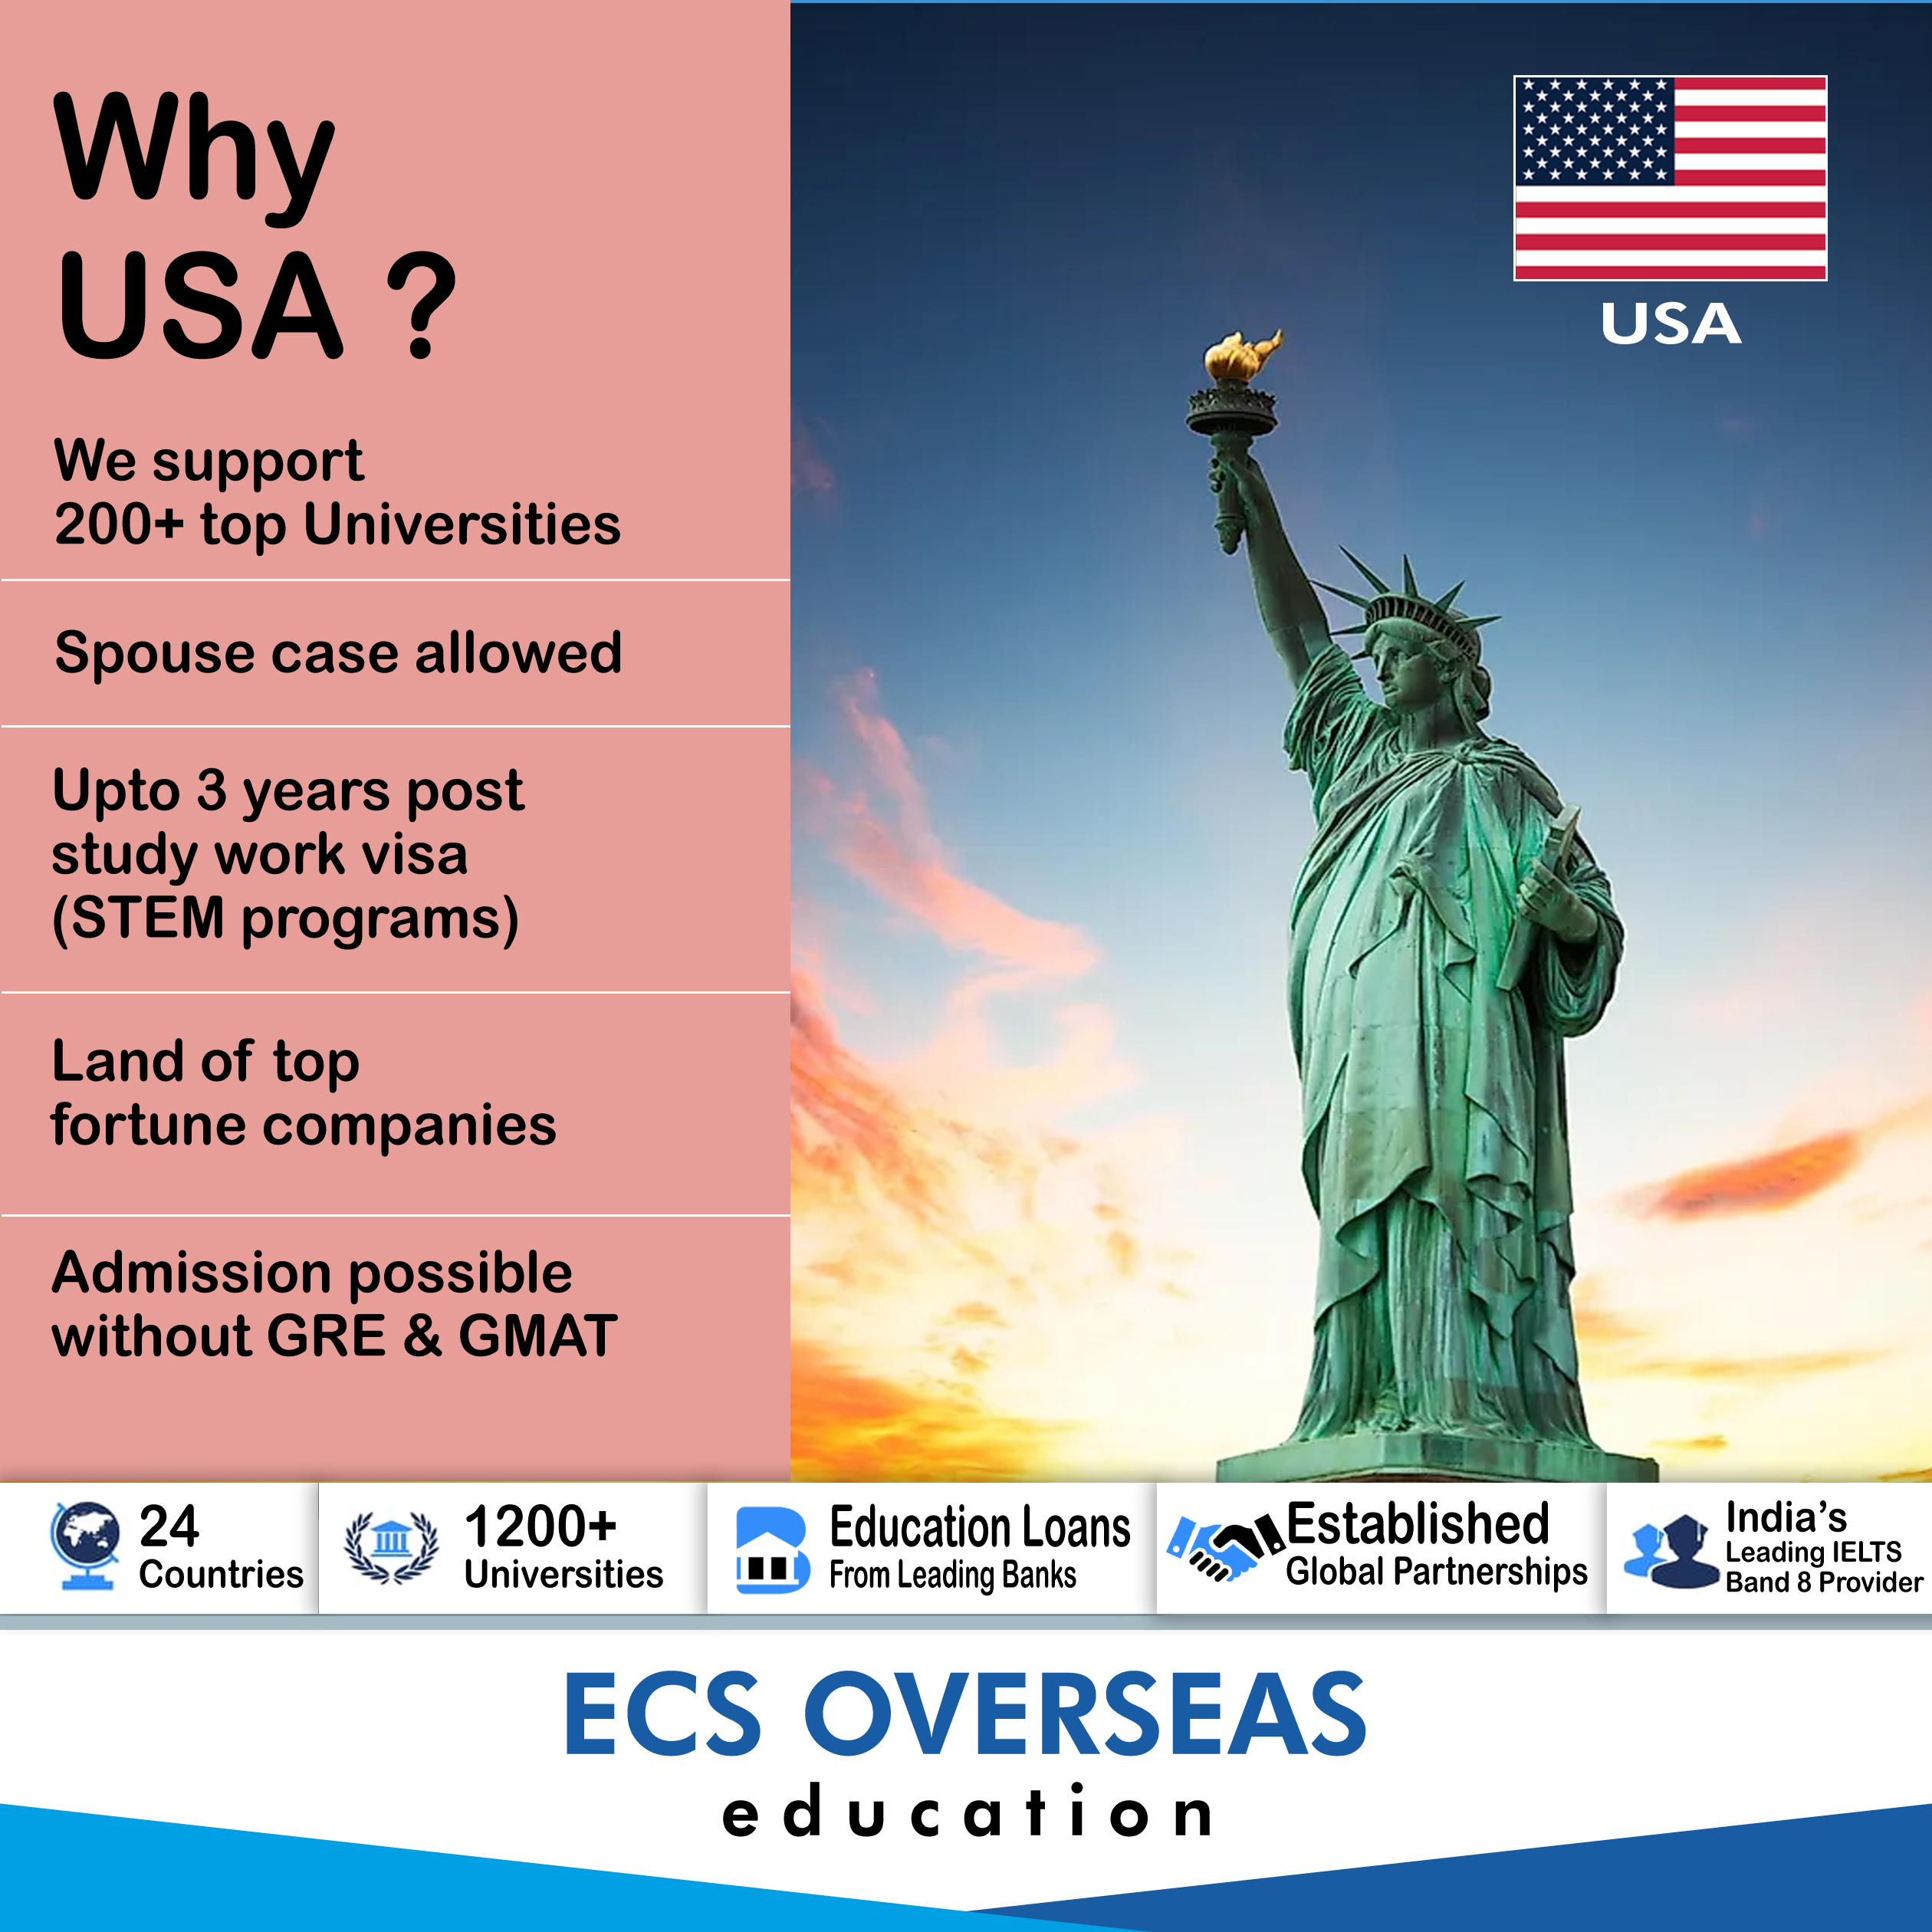 Overseas education consultants for USA